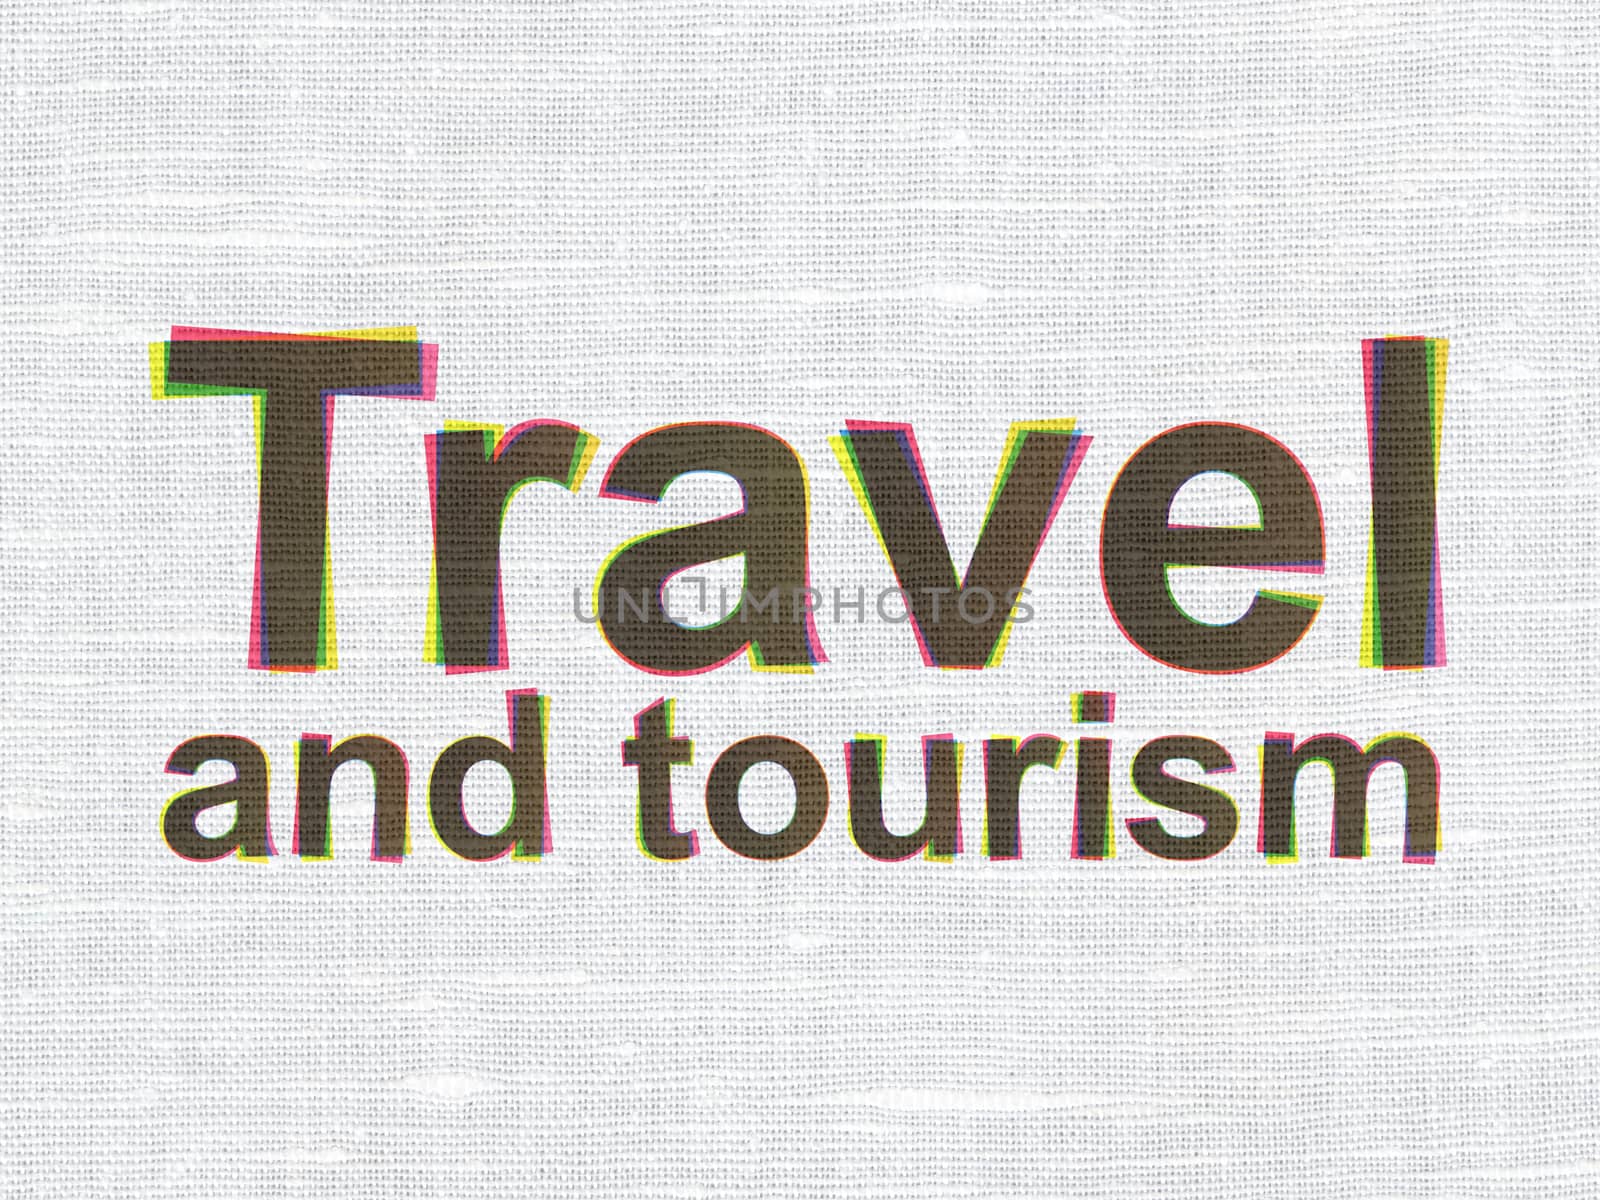 Vacation concept: CMYK Travel And Tourism on linen fabric texture background